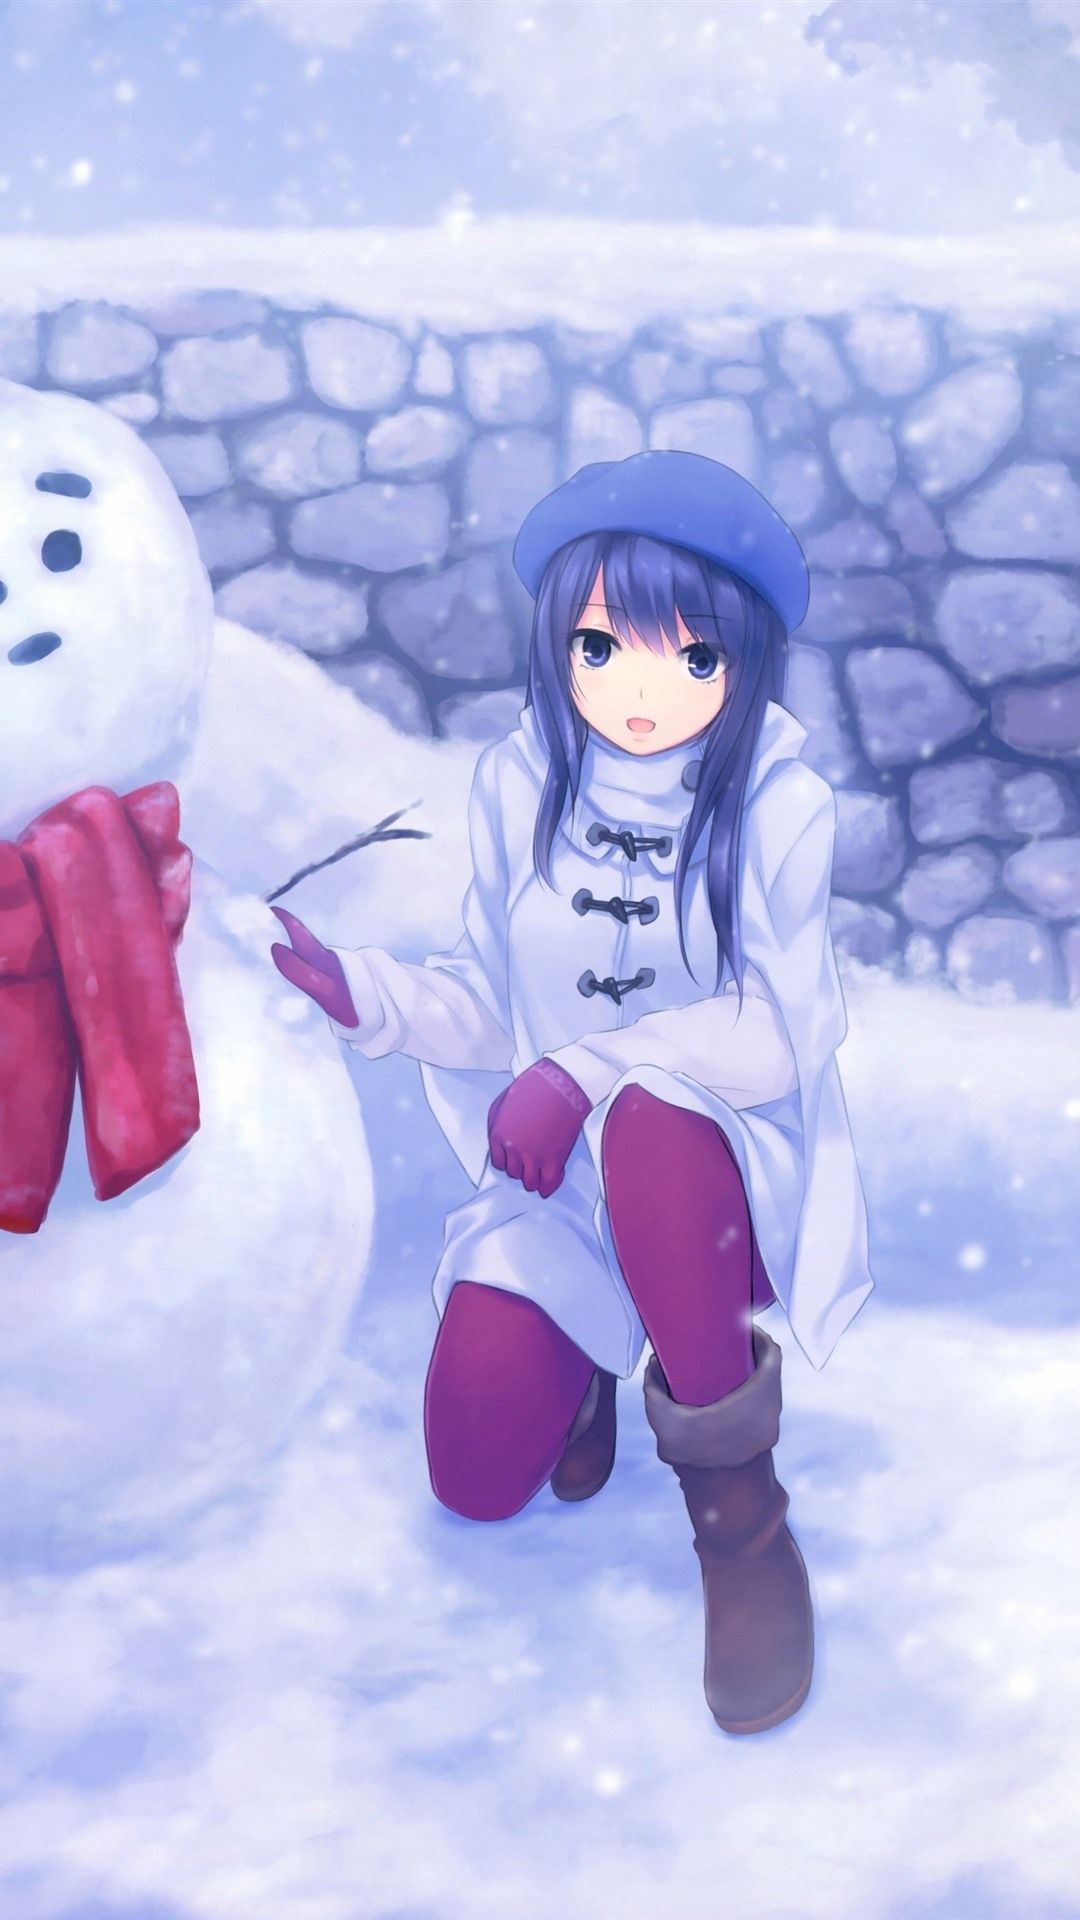 Anime Girl And Snowman, Snowy 1125x2436 IPhone 11 Pro XS X Wallpaper, Background, Picture, Image